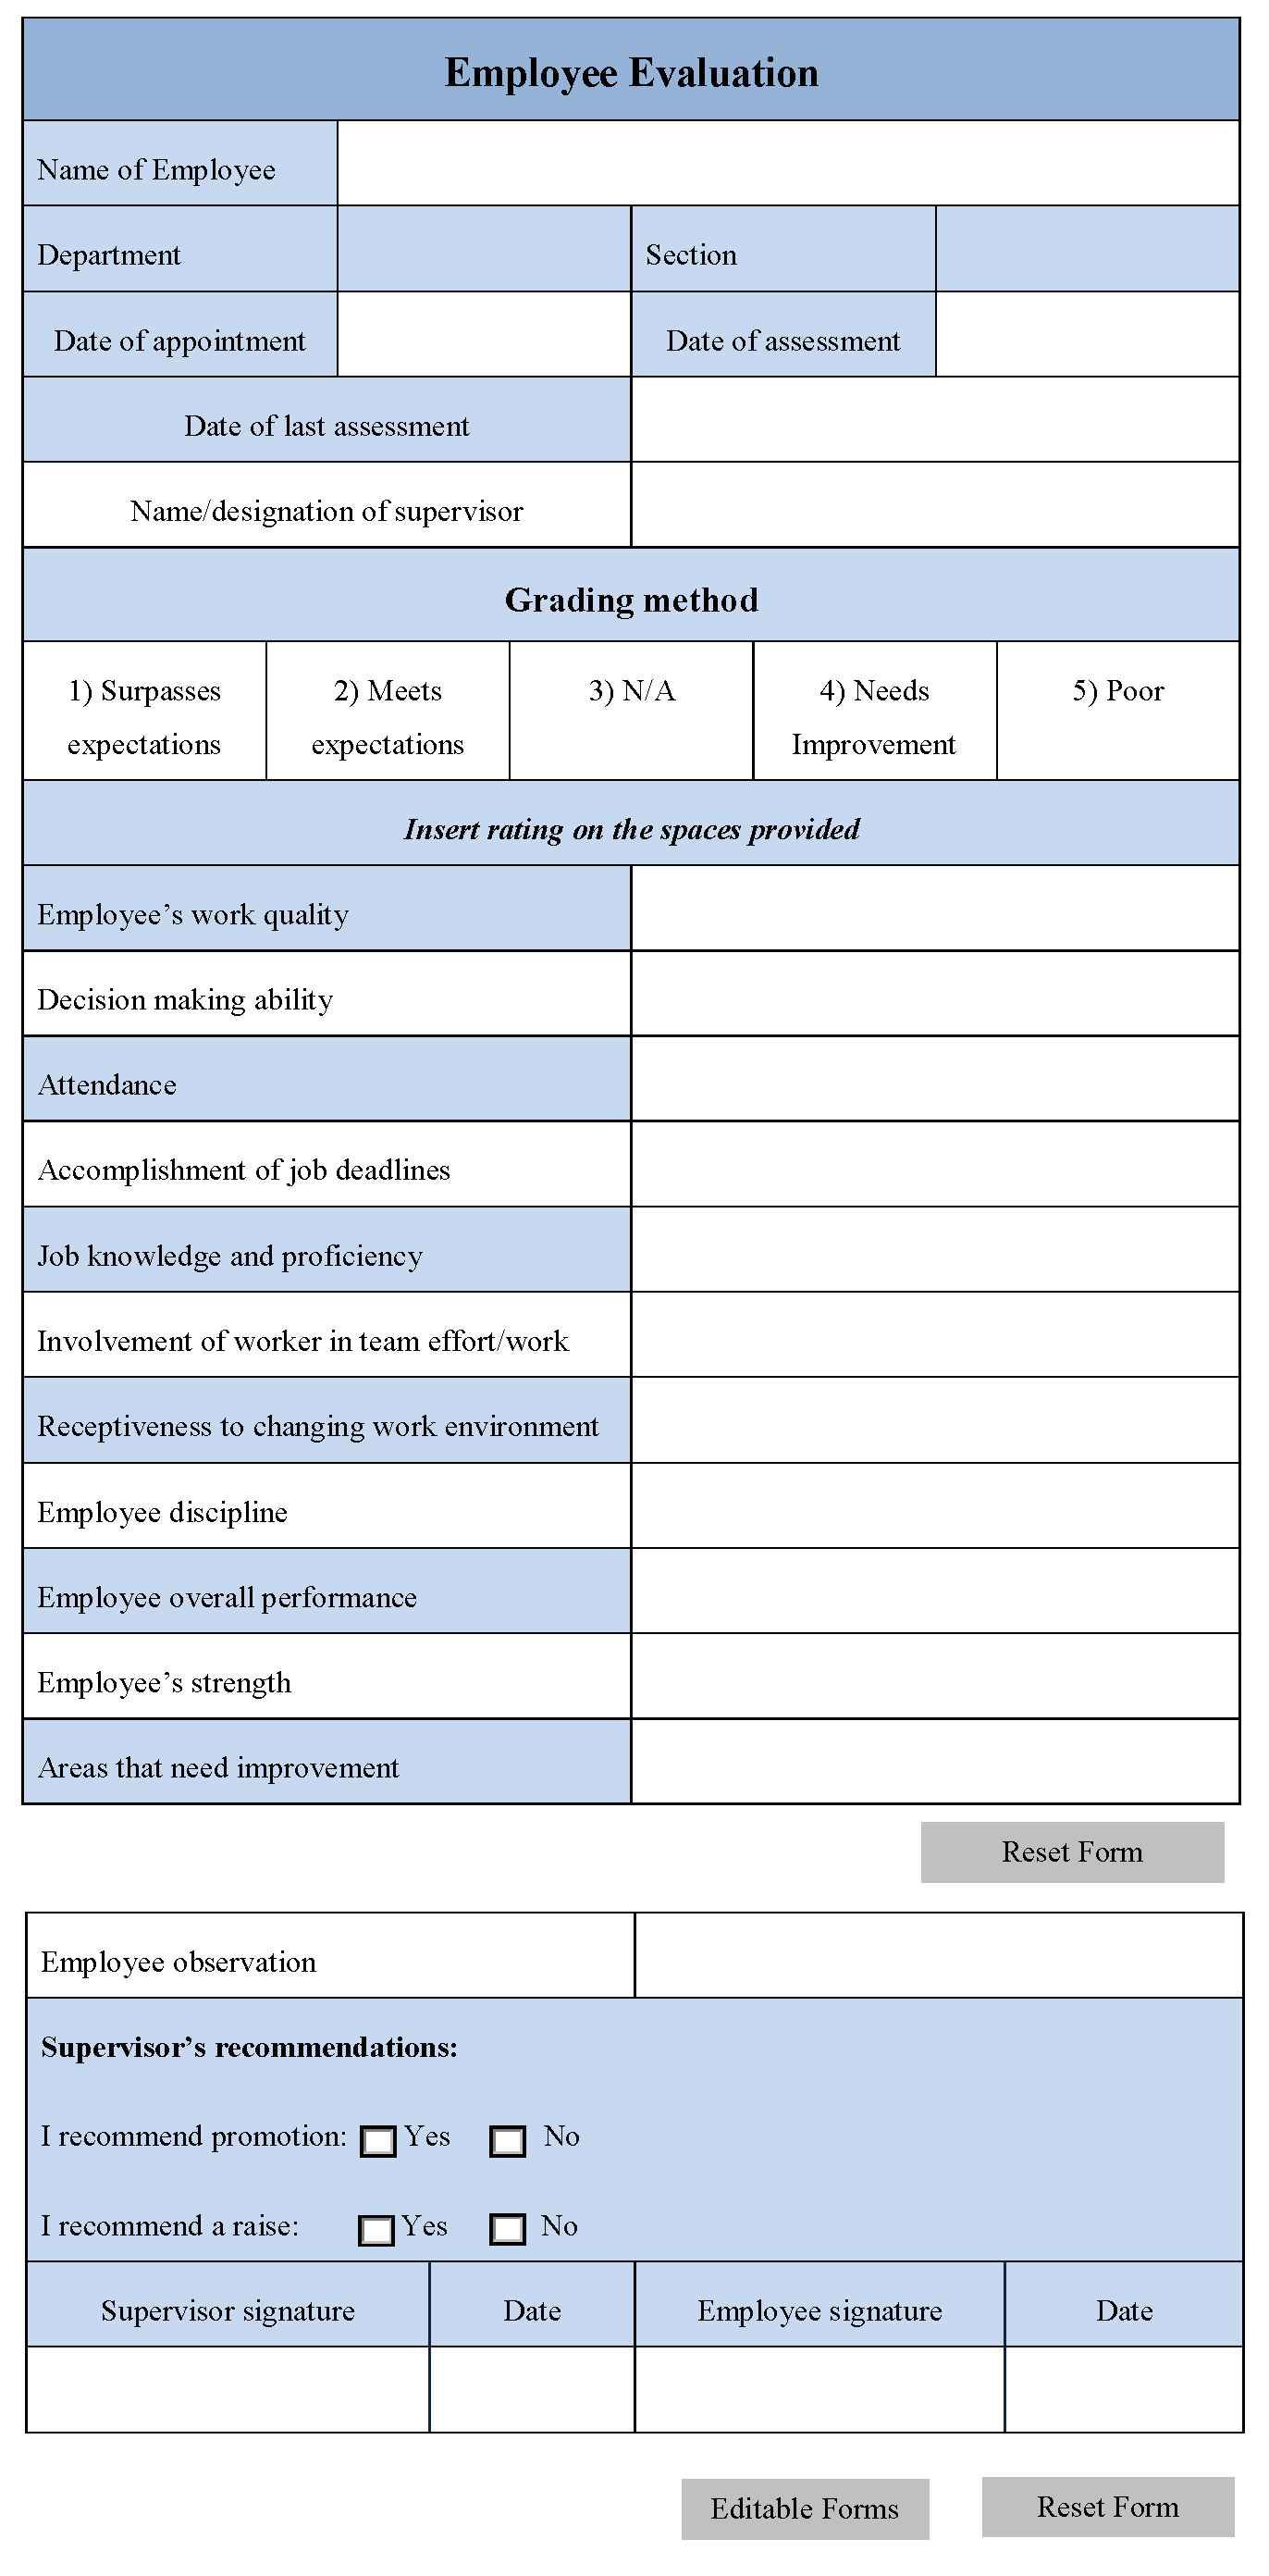 Onboarding Template Excel Evaluation Employee Employee Evaluation Form Evaluation Form